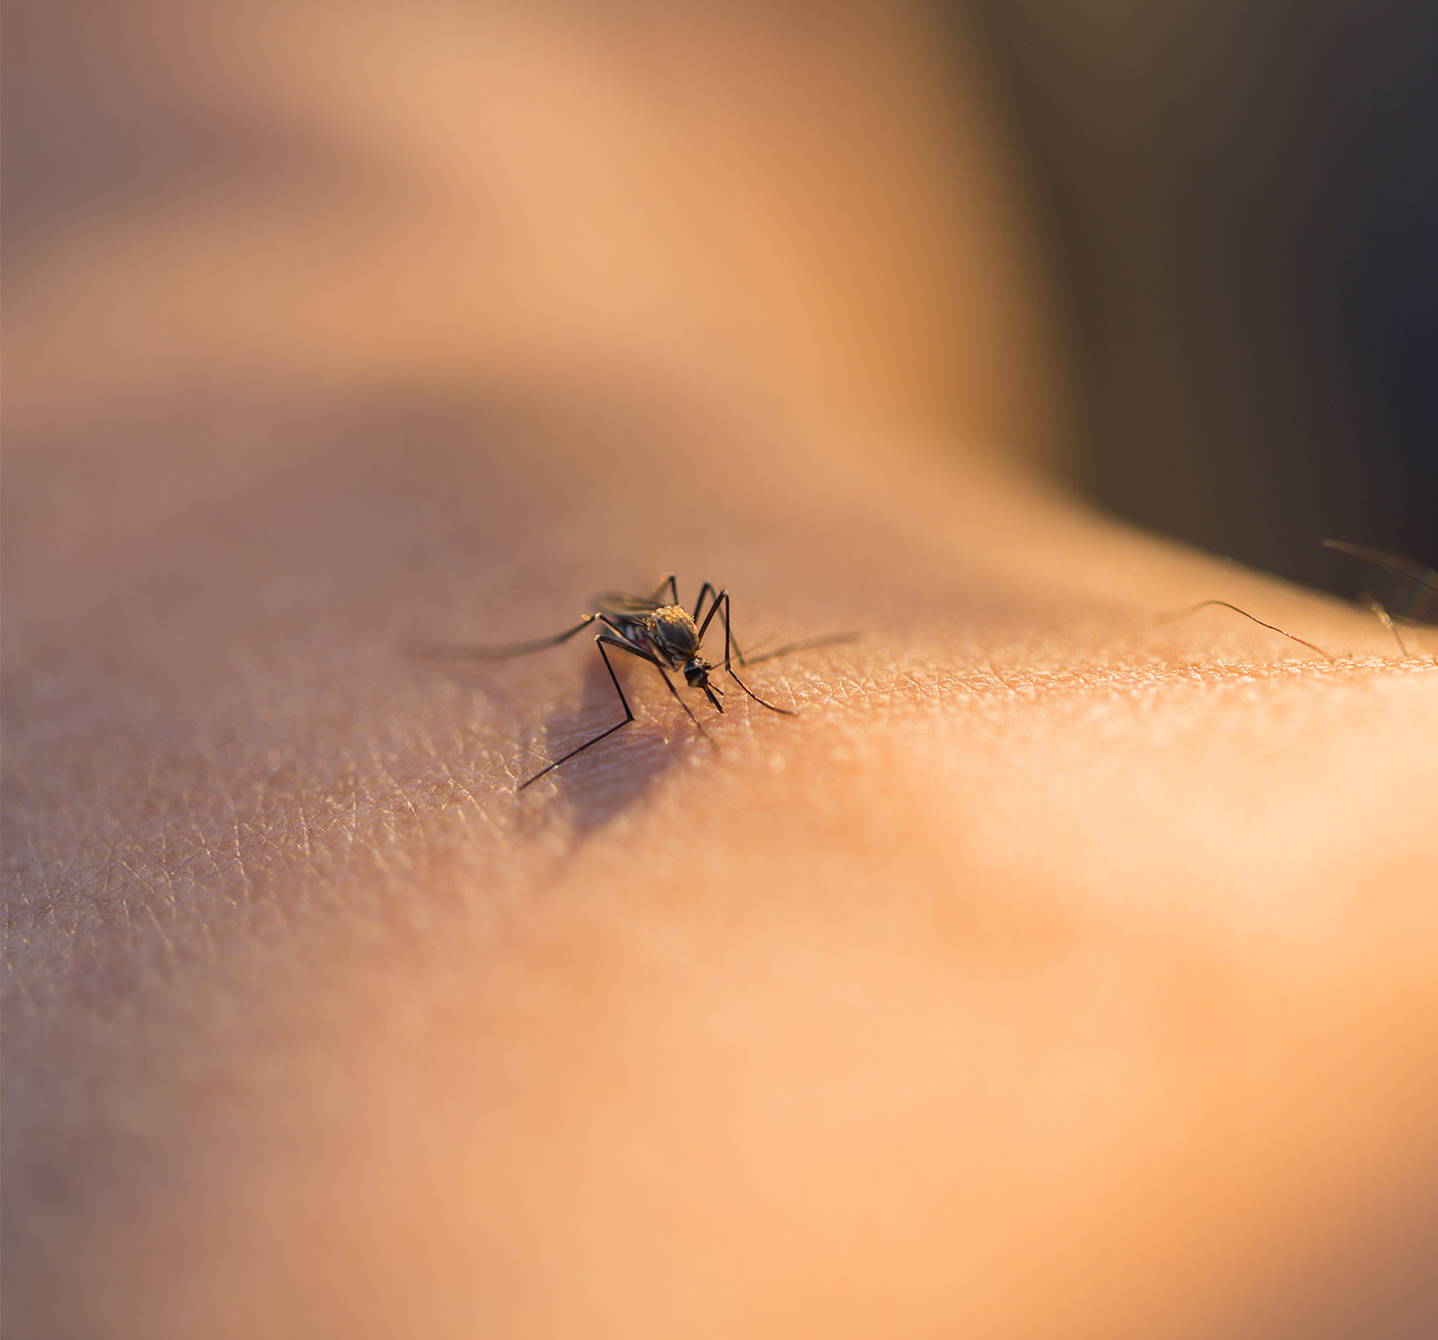 Mosquito sitting on someone’s skin and feeding. Chemicals in the bug’s saliva and can cause mosquito bite allergy symptoms